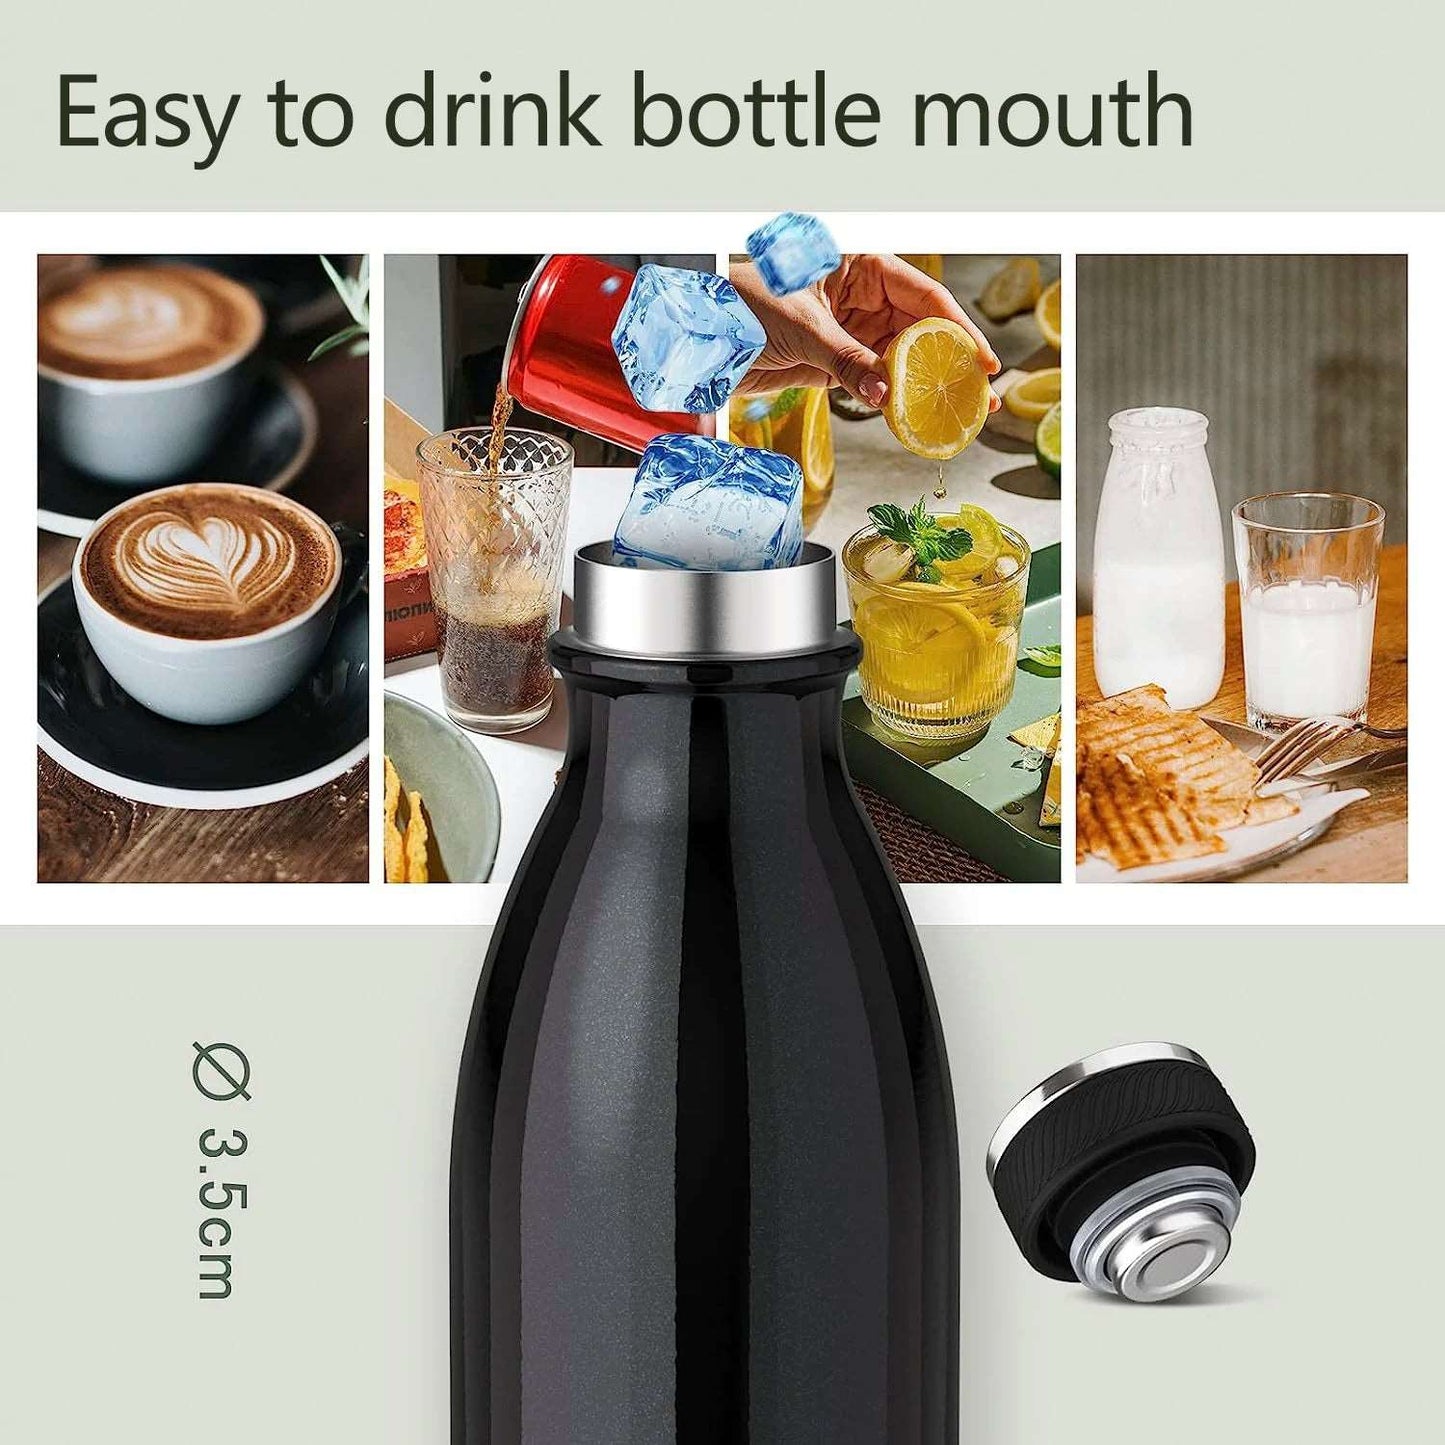 FEIJIAN 1-Liter Vacuum Insulated Cup - Keeps Drinks Cold for 24 Hours